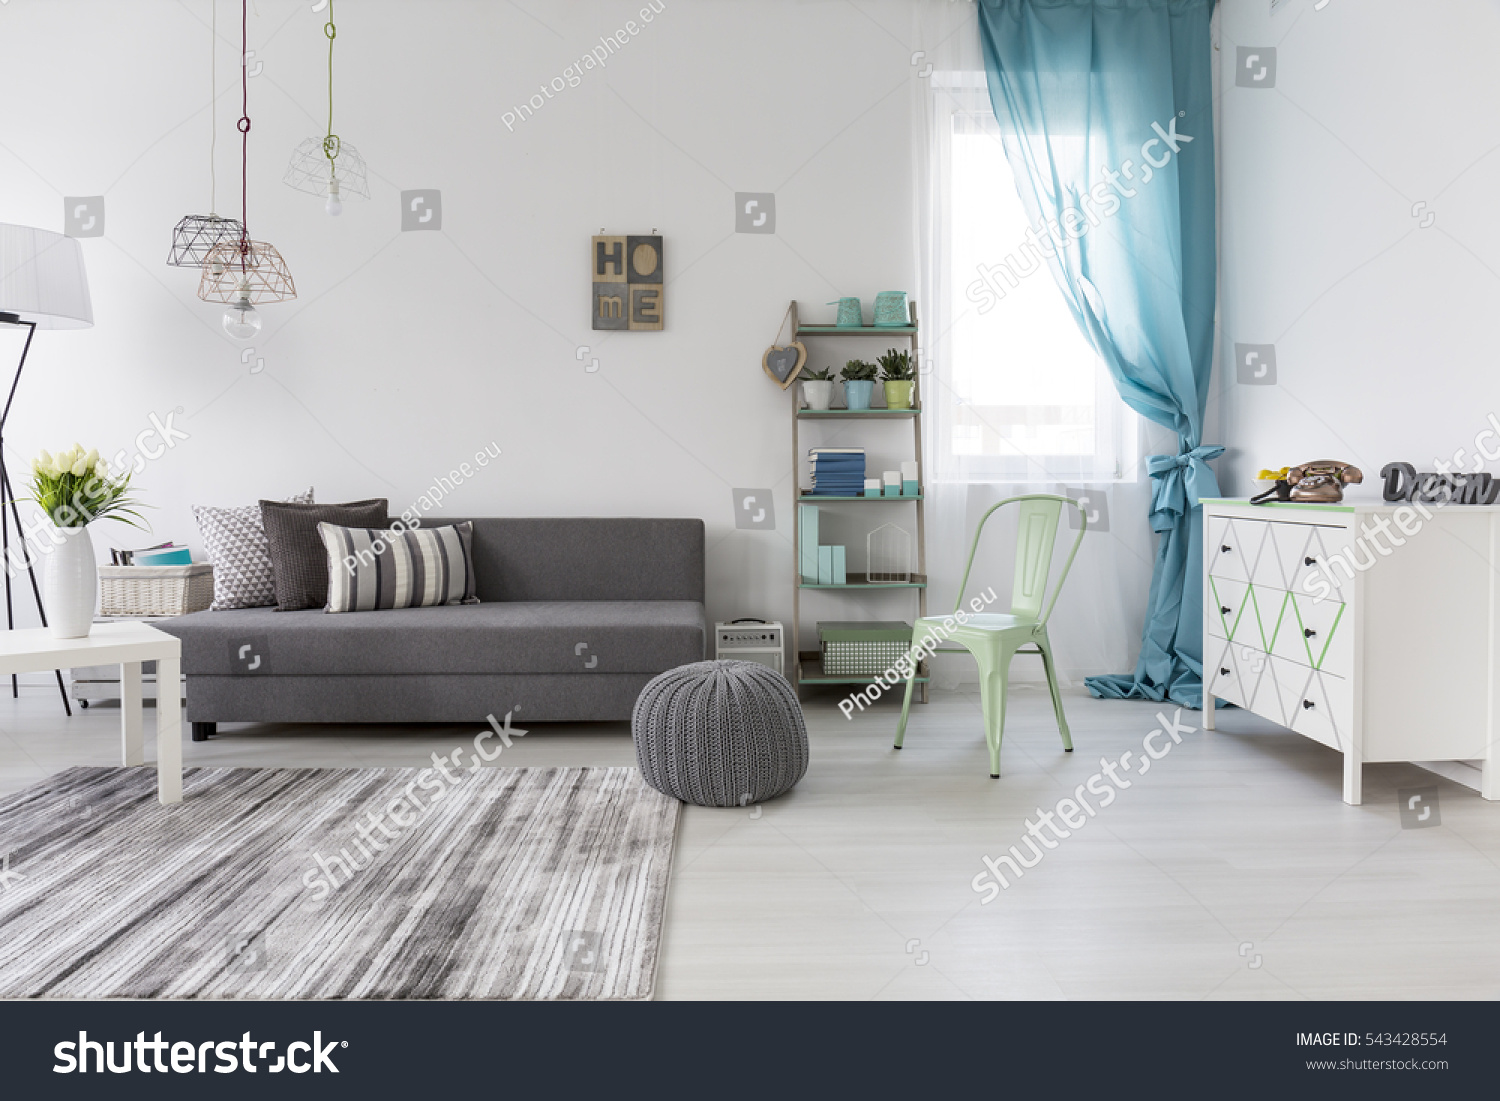 Bright spacious living room with comfortable couch and chest of drawers #543428554